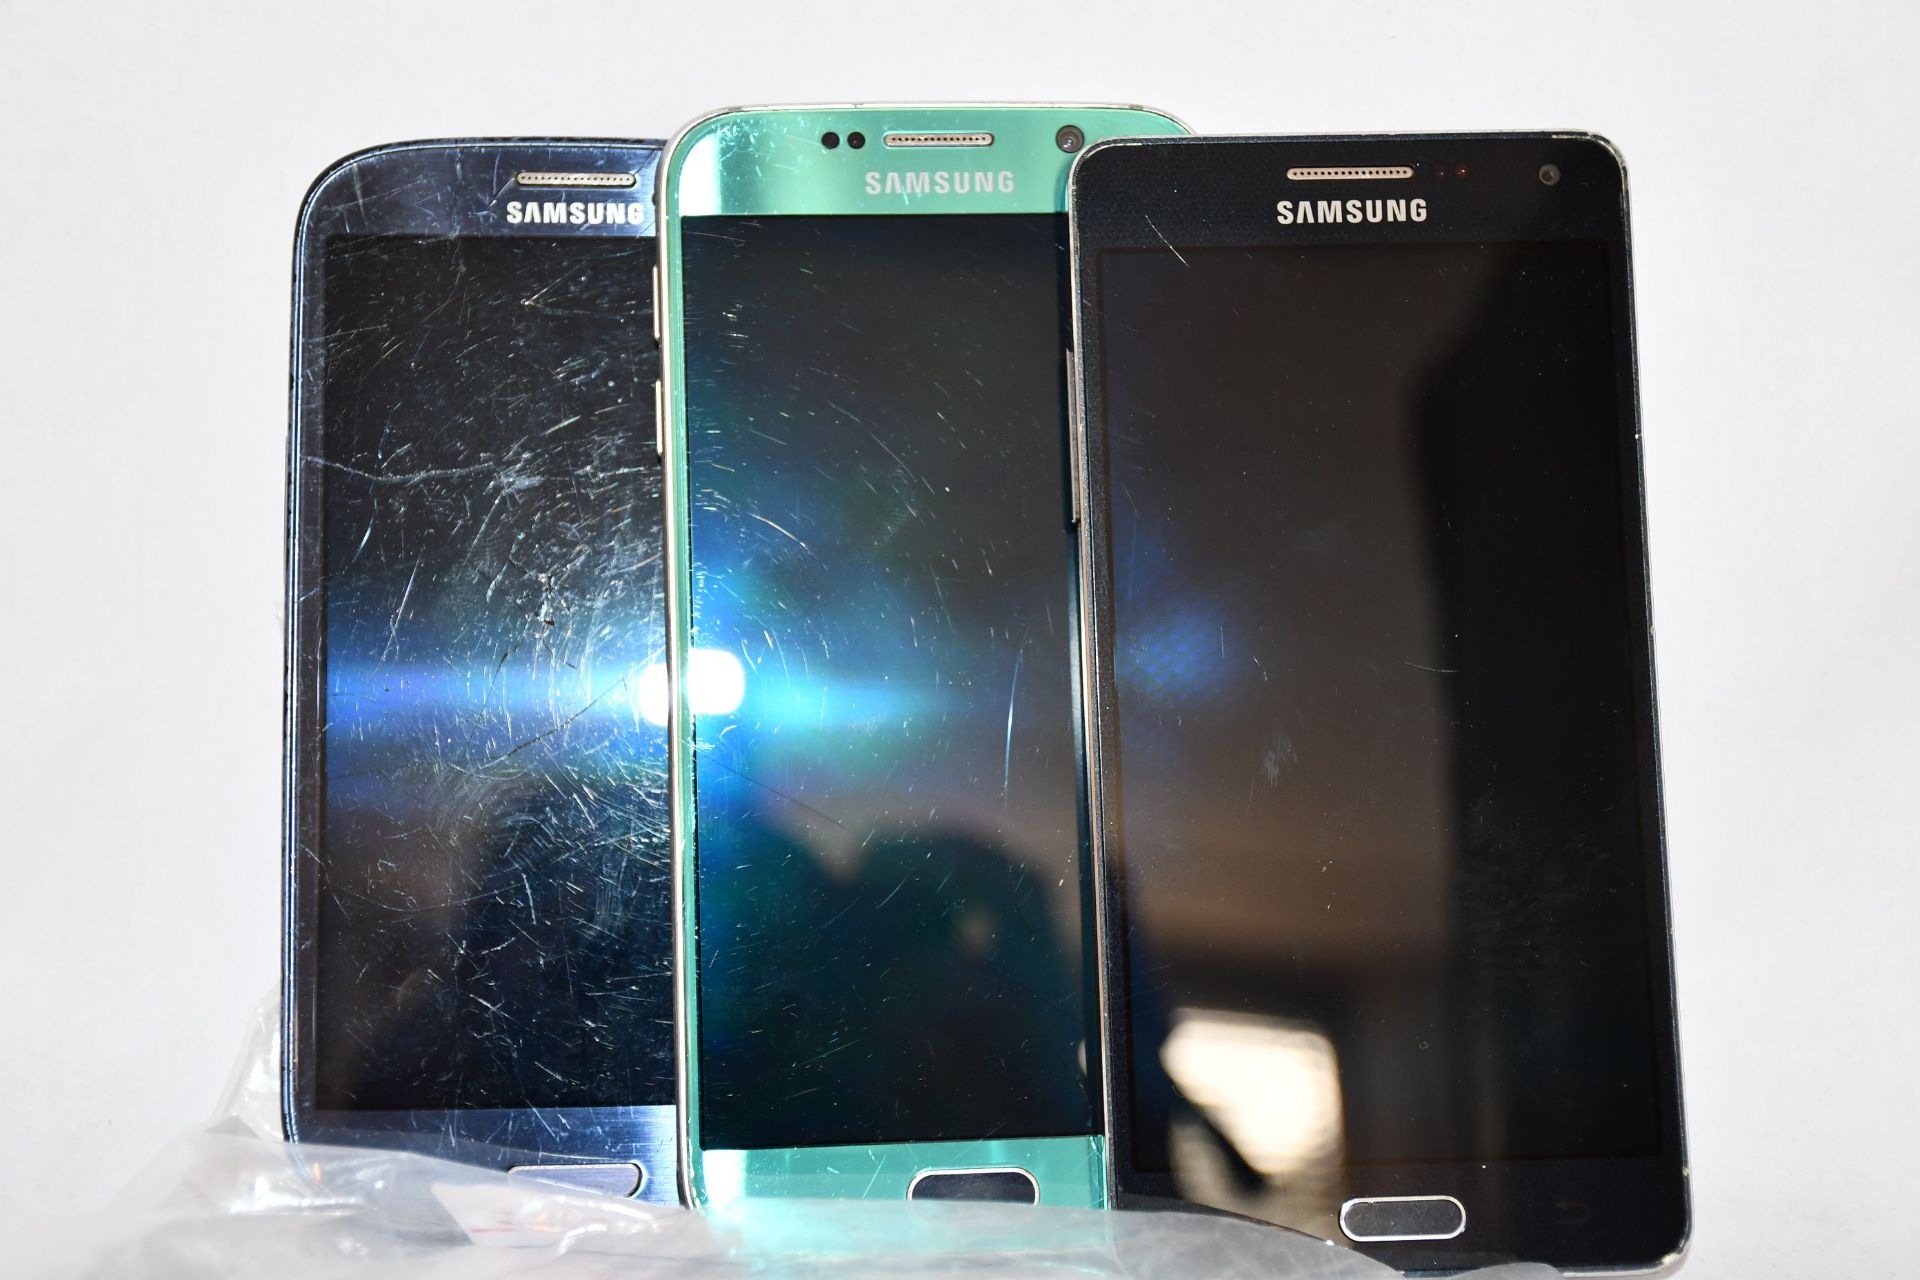 Three pre-owned smartphones (All FRP Clear): A Samsung Galaxy S6 SM-G920F 64GB (IMEI: